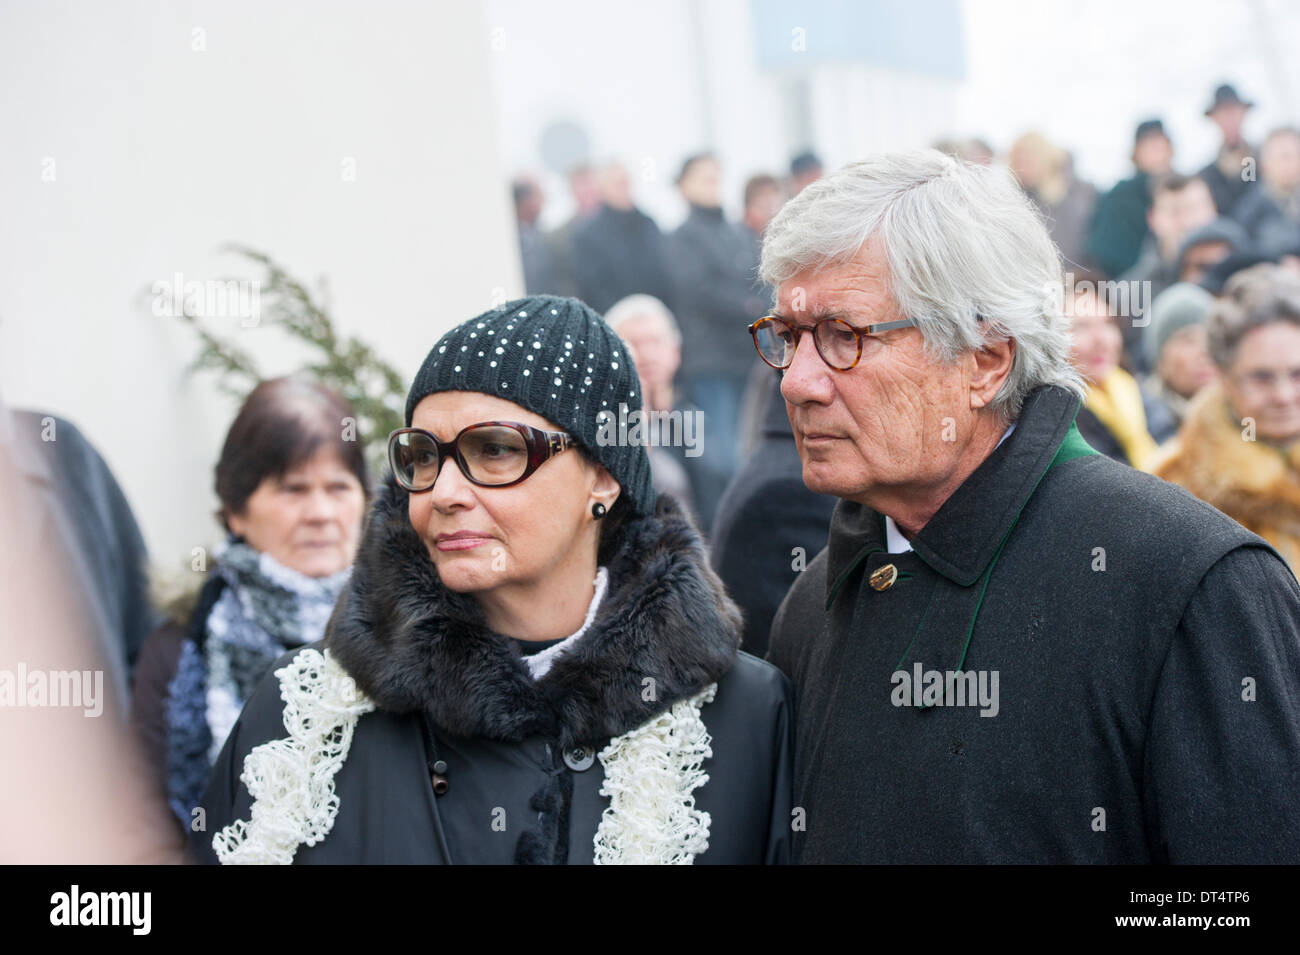 Preitenegg, Austria. 08th Feb, 2014. Actor Christian Wolff and his wife Marina attends the funeral service for the Swiss-Austrian actor Maximilian Schell in his hometown Preitenegg, Austria, 08 February 2014. Maximilian Schell died aged 83 after a surgery on 01 February 2014. Photo: Marc Mueller/dpa/Alamy Live News Stock Photo